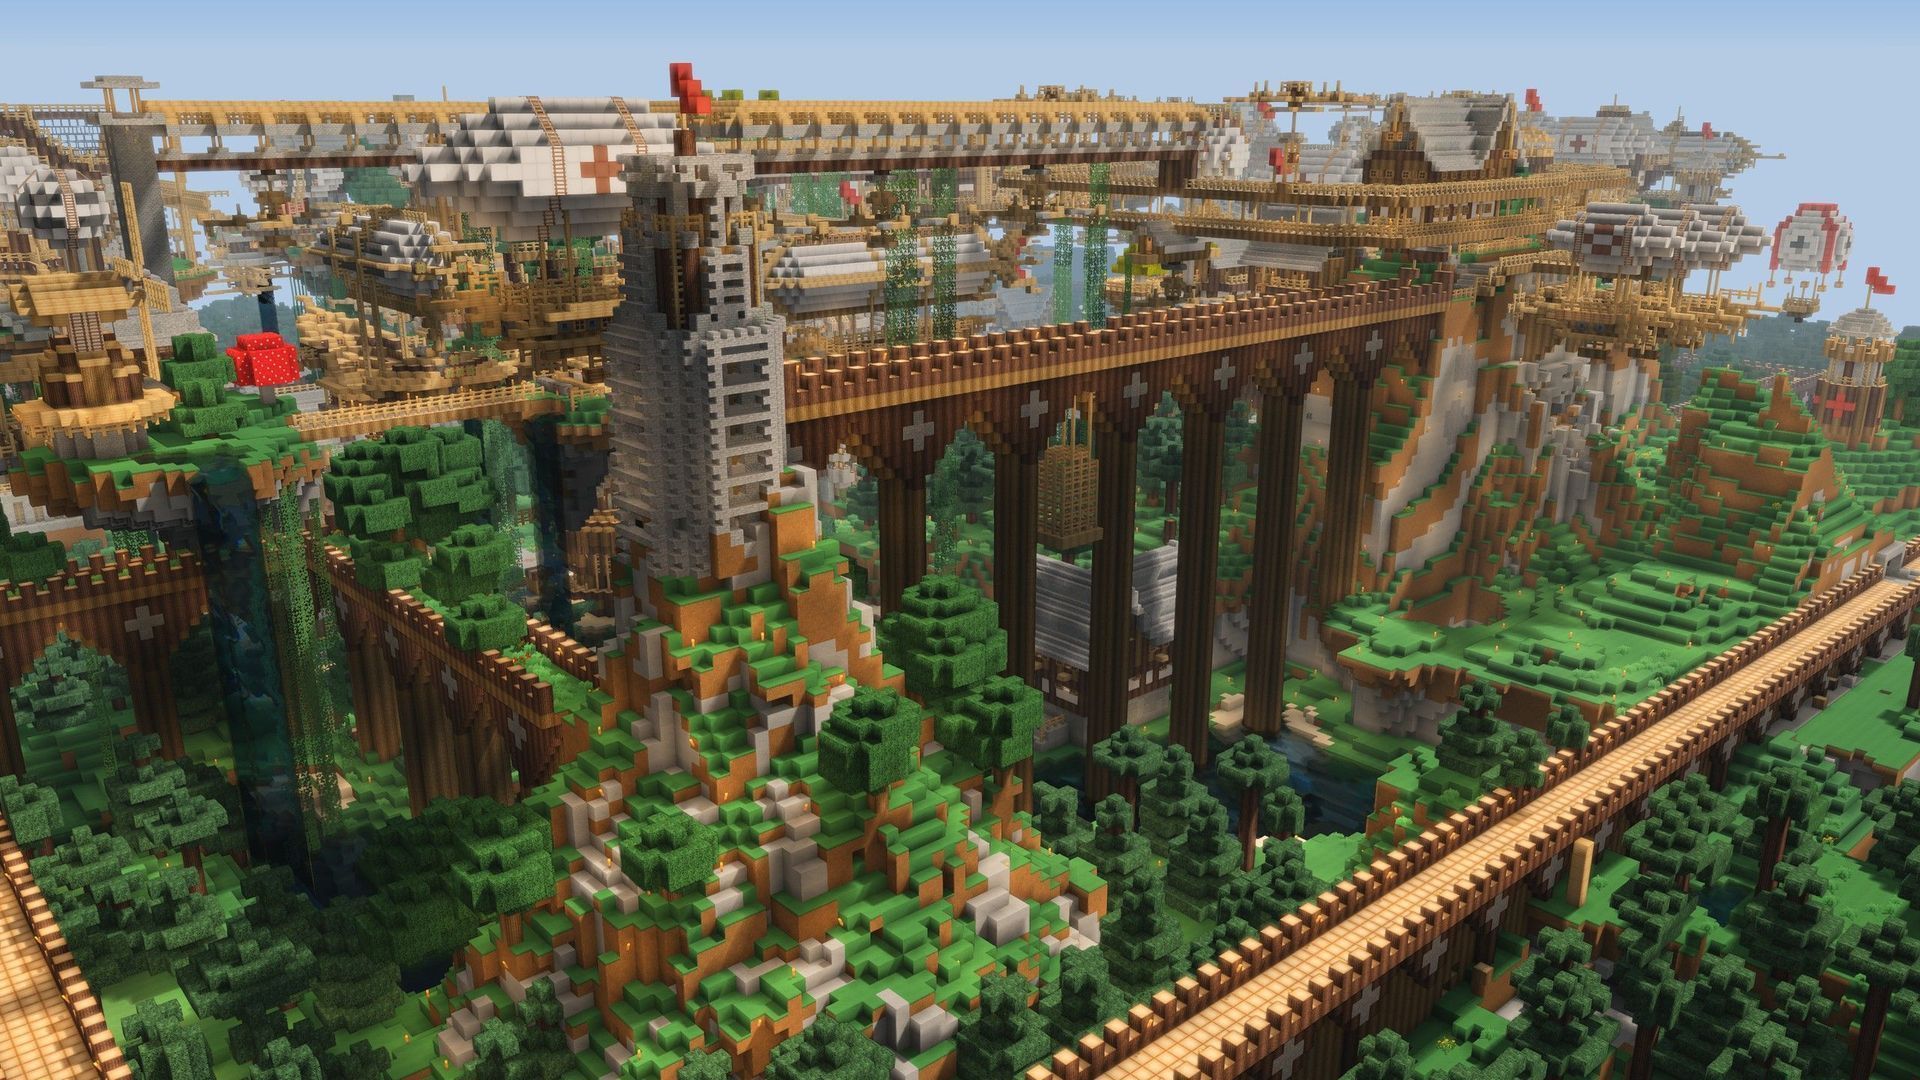 Top Minecraft Hd Wallpaper 1920x1080 Images for Pinterest